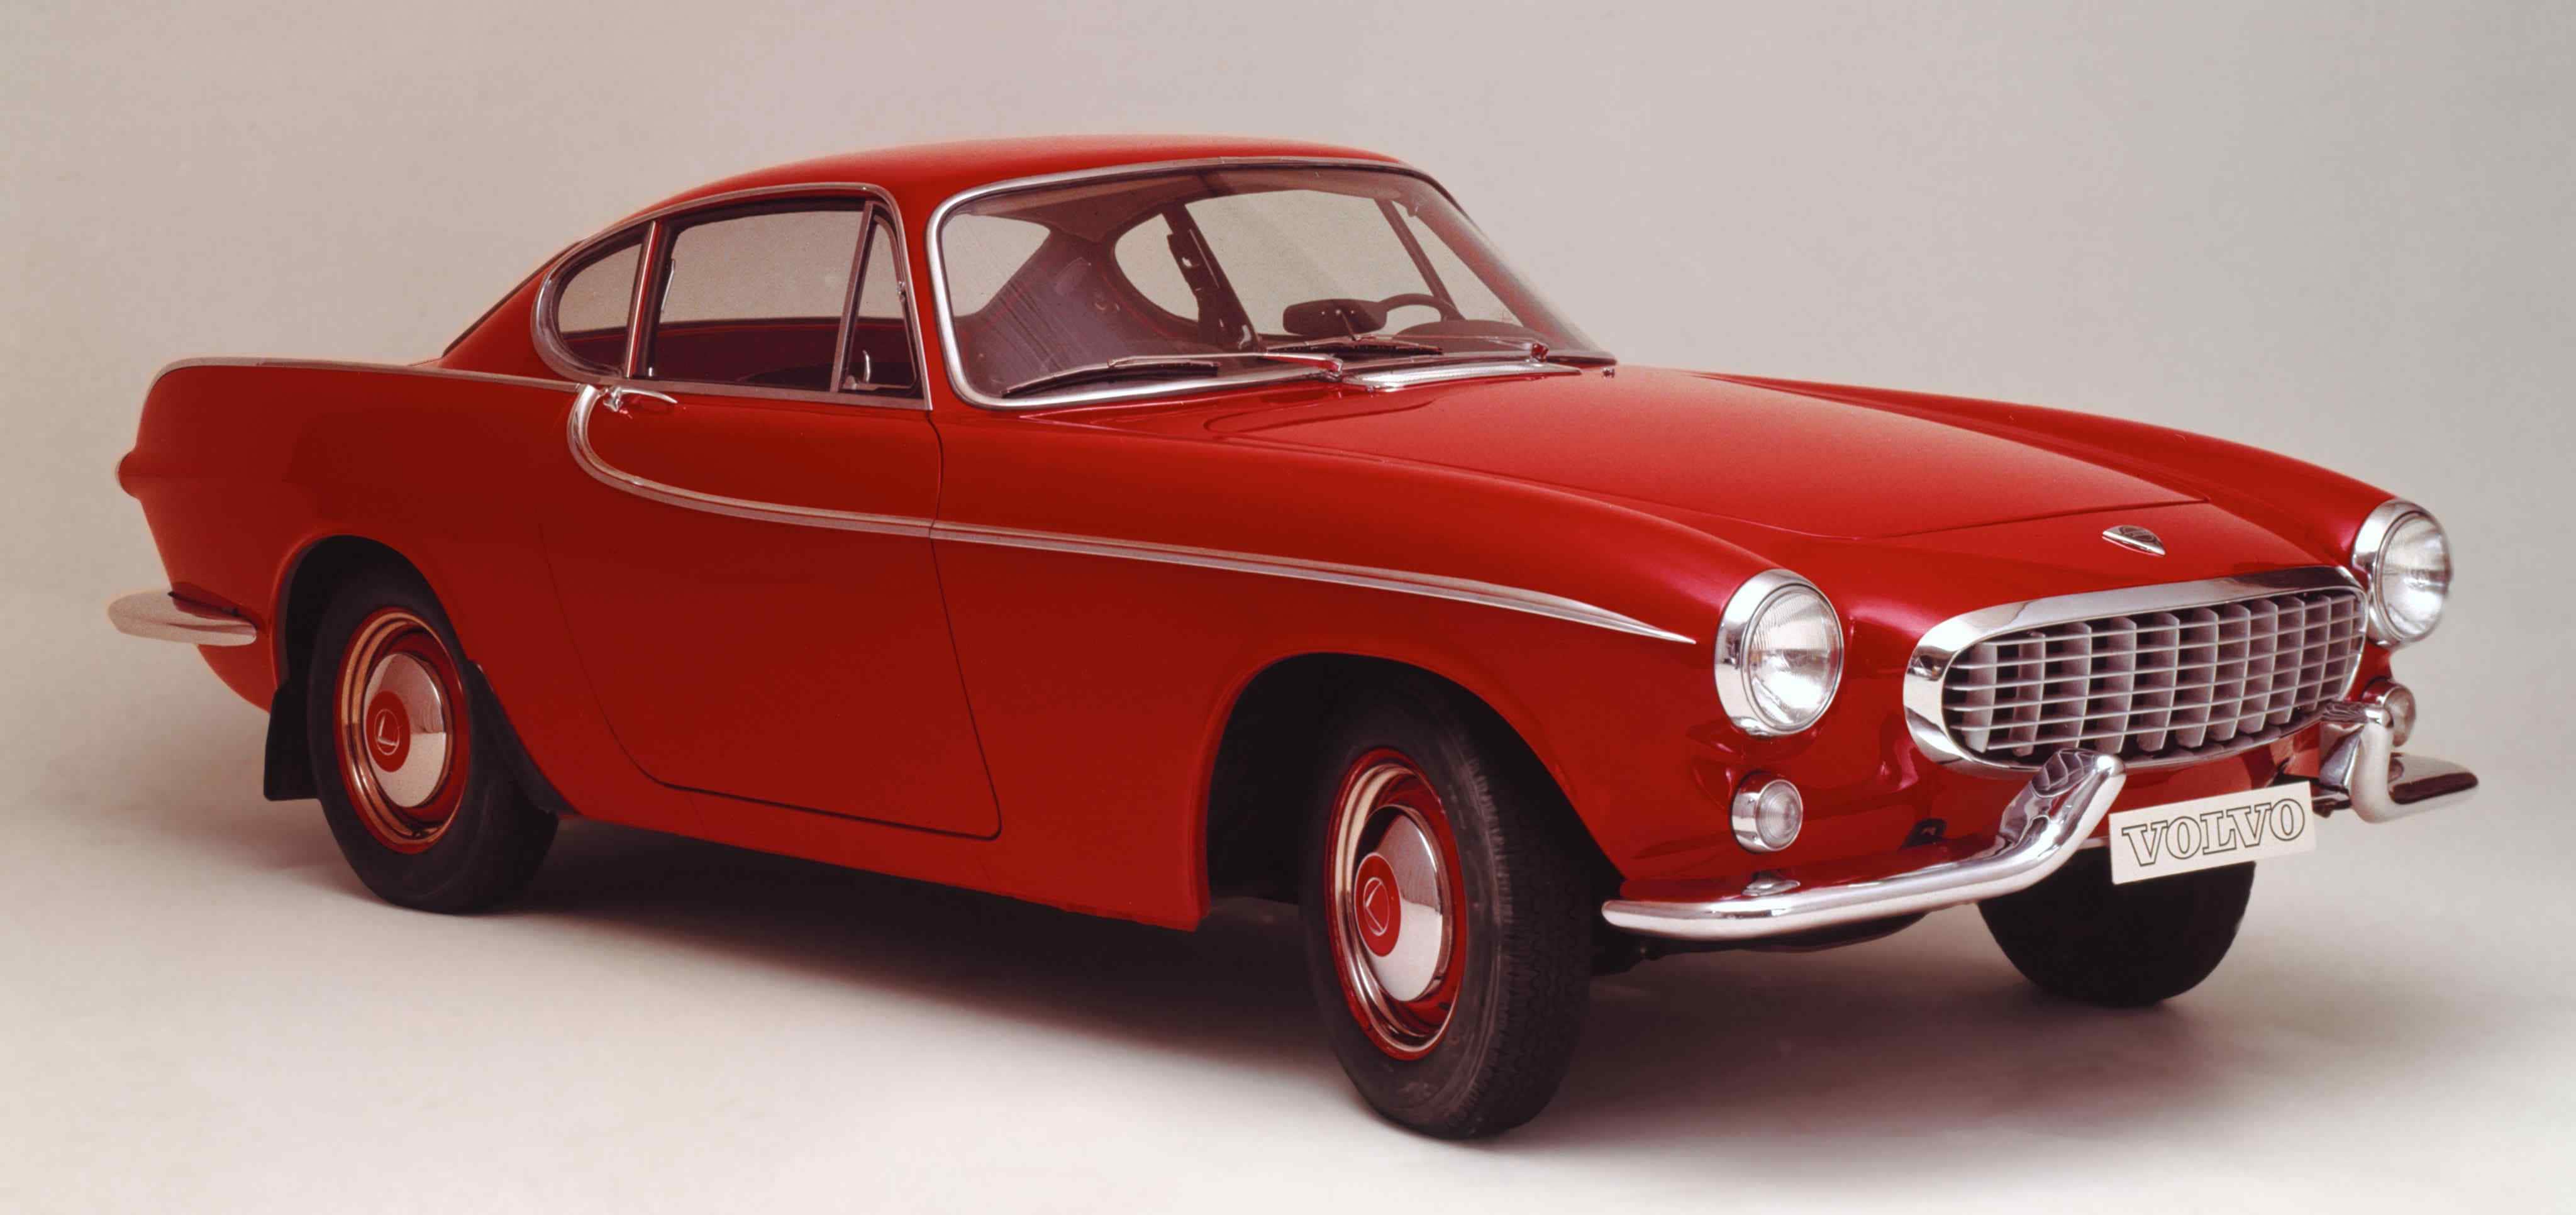 A red Volvo P1800 seen from front left side